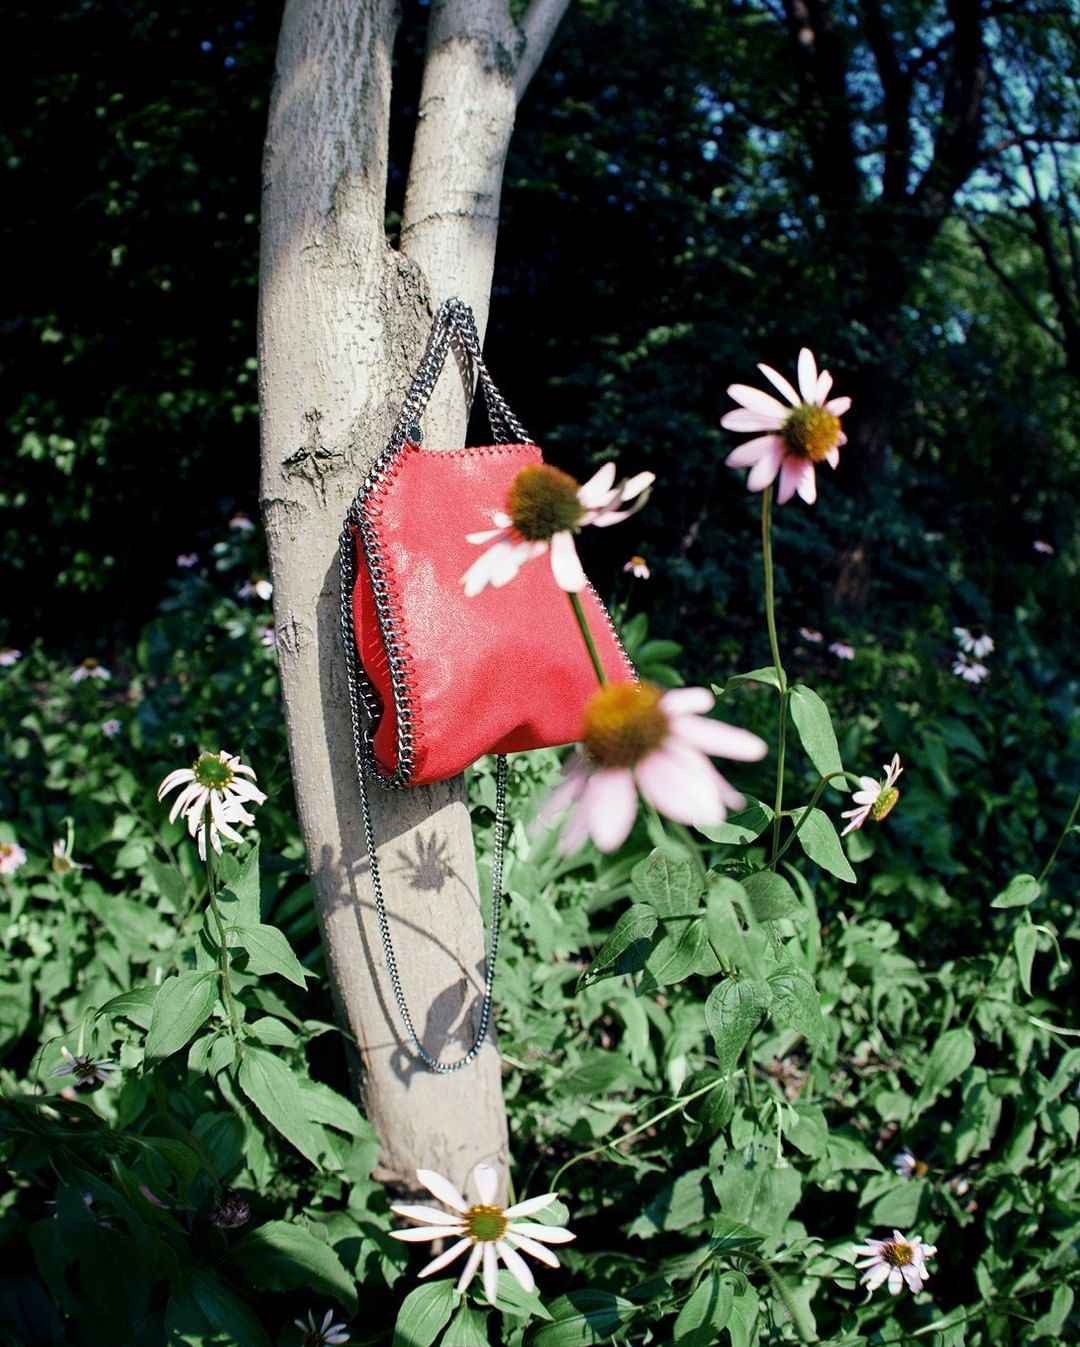 Stella McCartney - Autumn 2020 subverts what has been done before with subtlety and wit, stepping forward into a new era for the Stella woman. Our iconic vegan, cruelty-free #Falabella bag is seen wit...